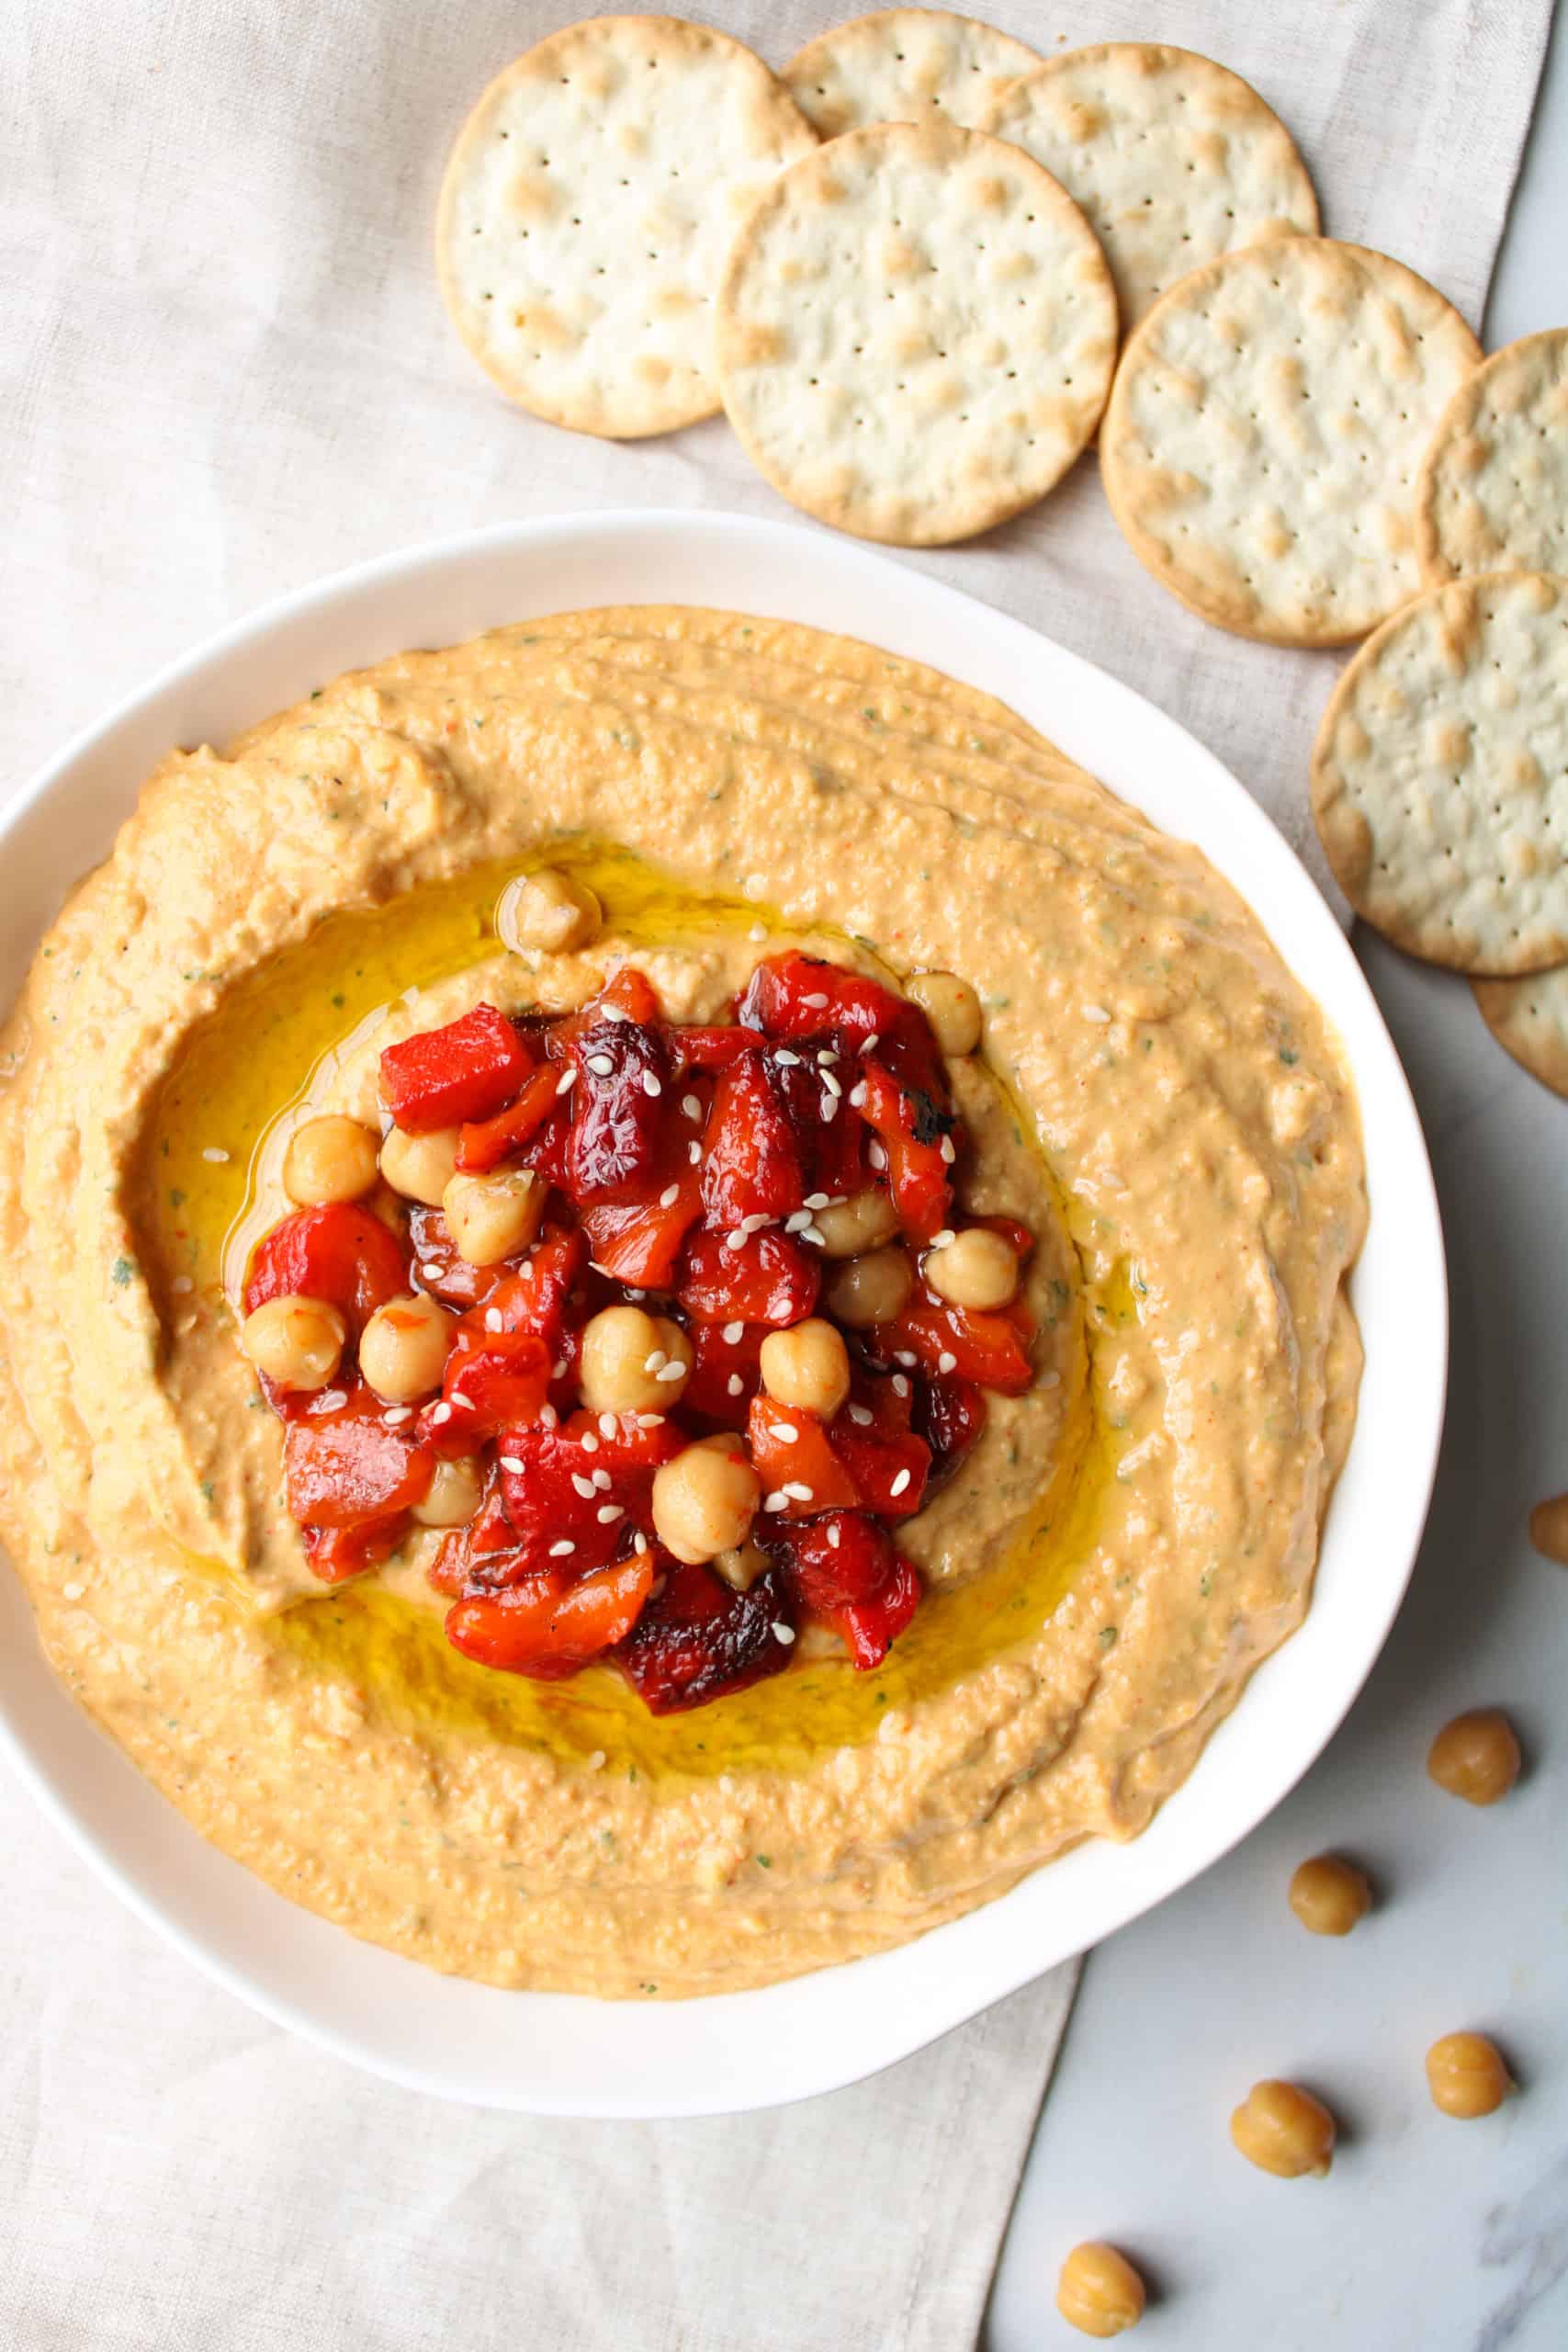 Red bell pepper hummus in a bowl with crackers on a table.